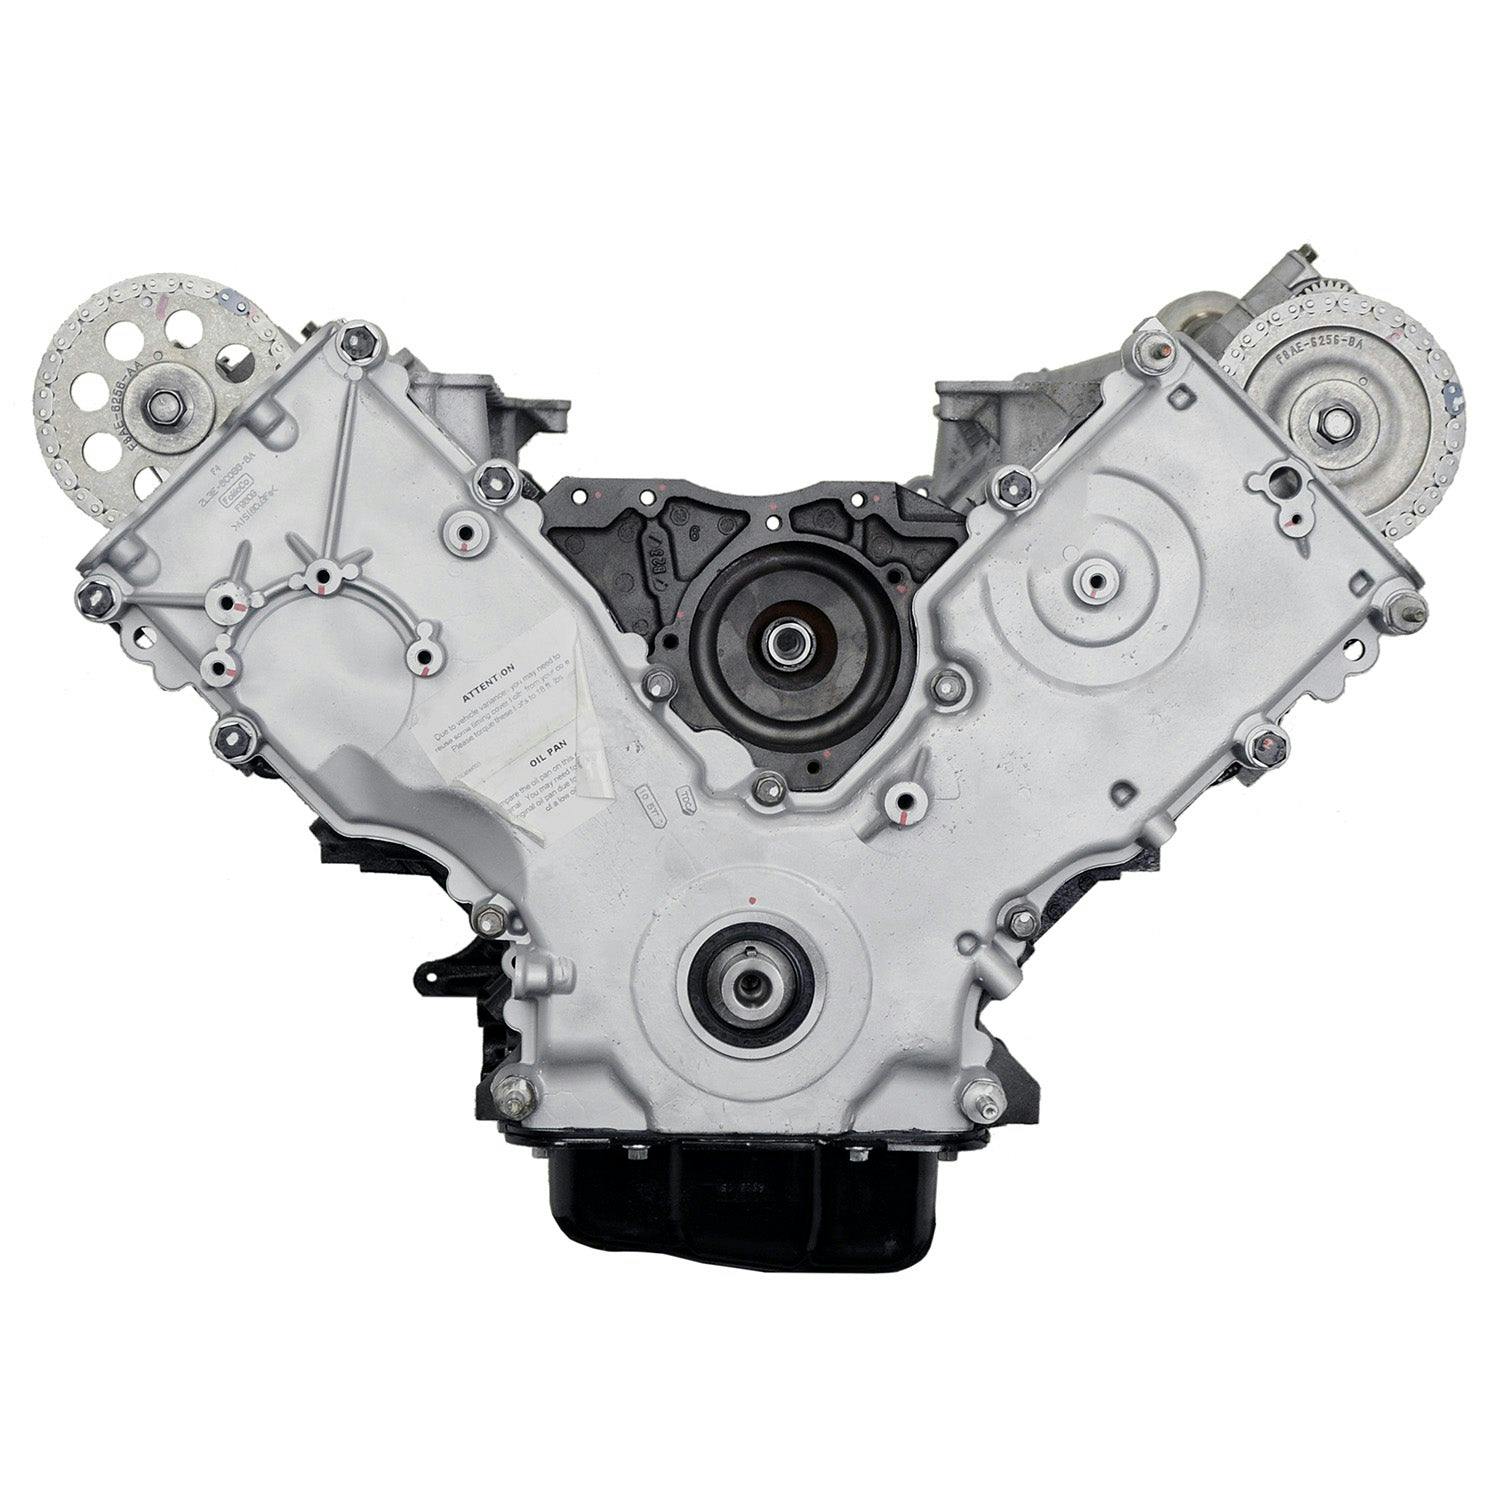 1.6L Inline-4 Engine for 2011-2013 Ford Fiesta